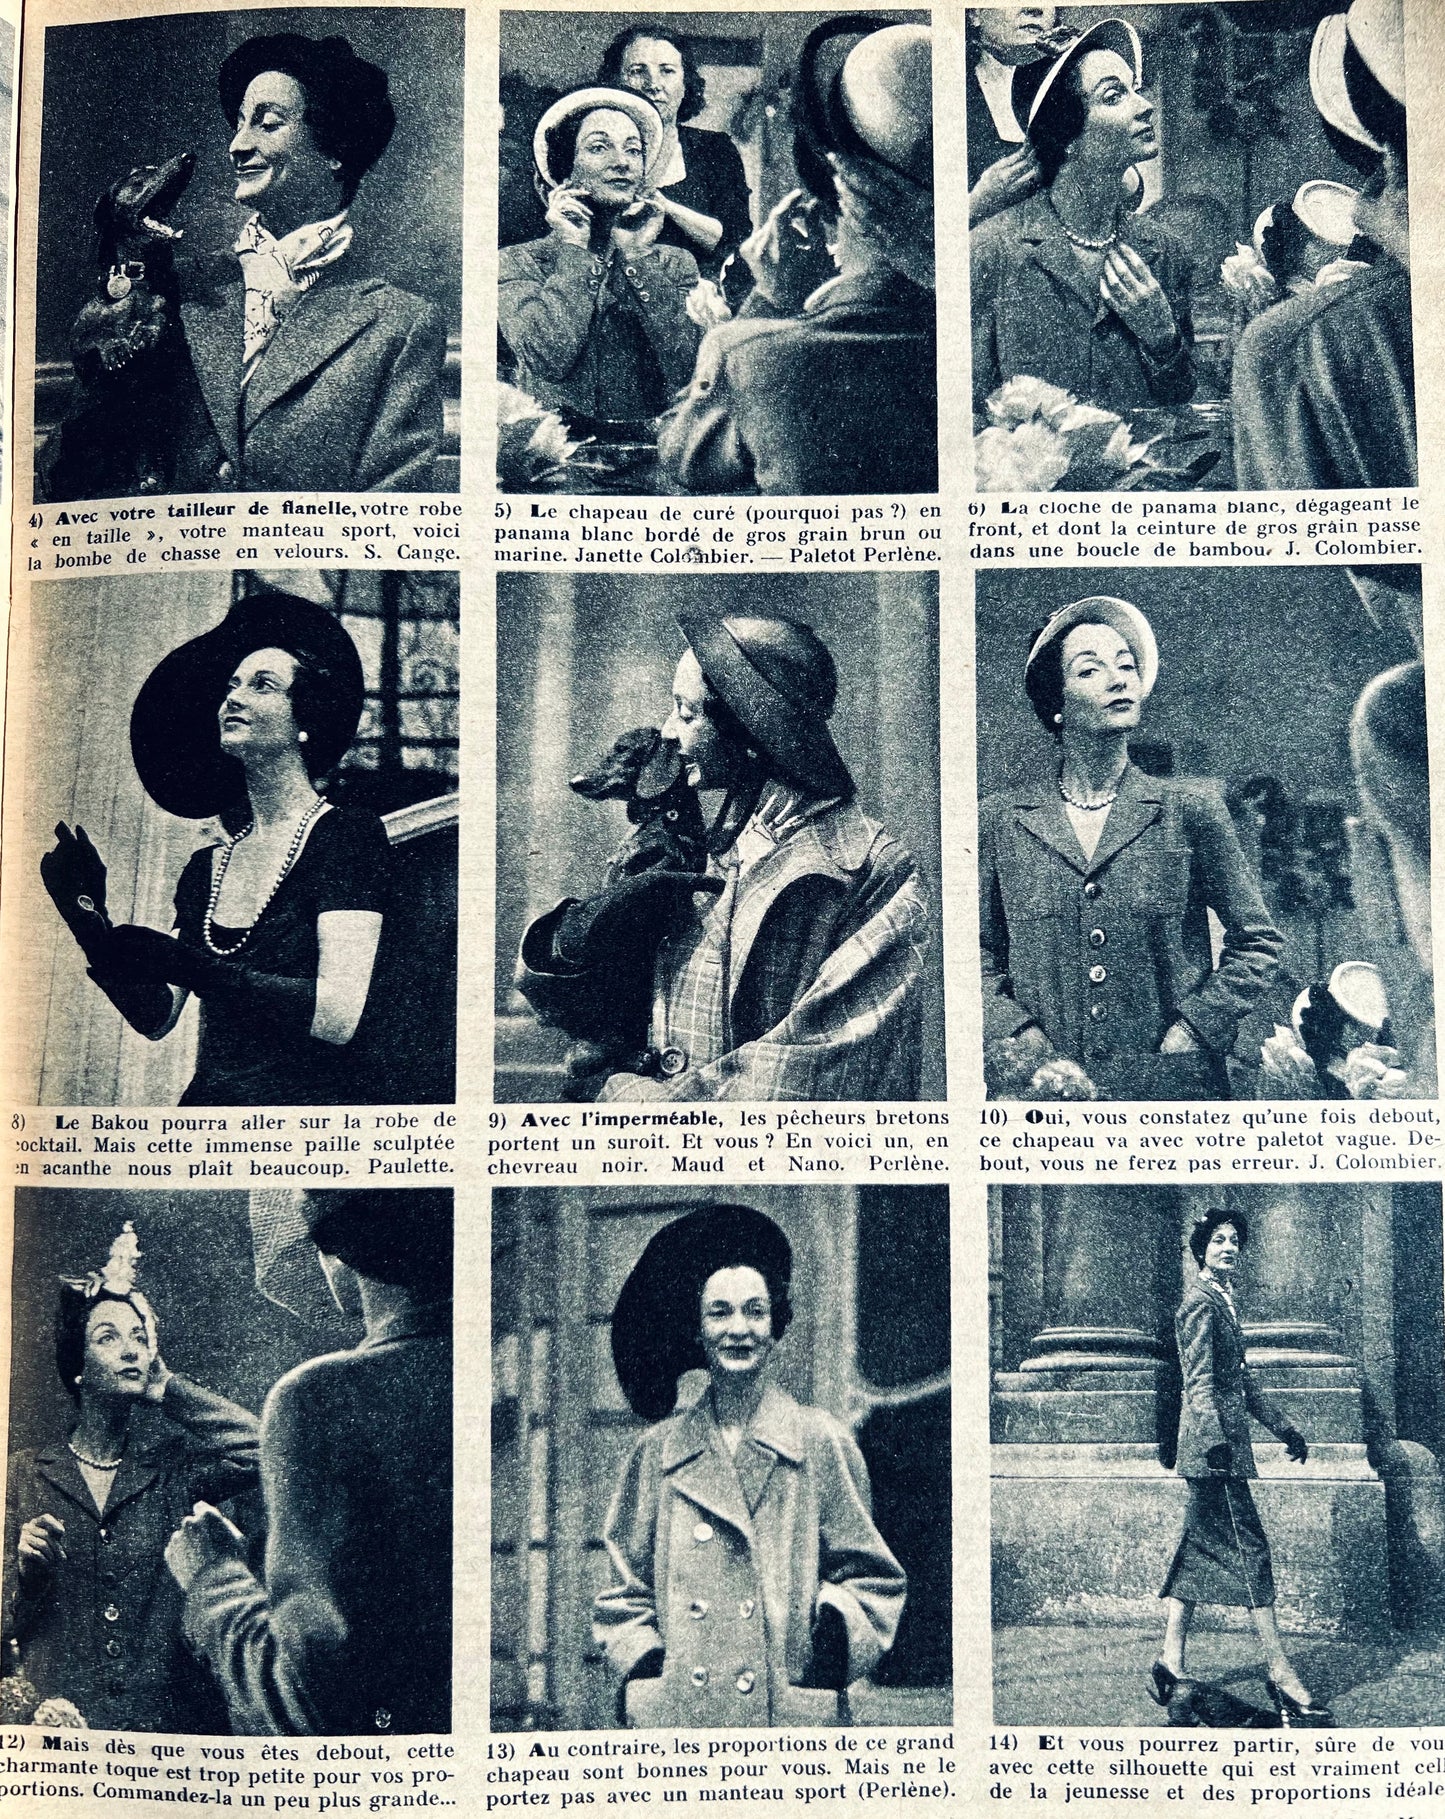 Cecile Aubry in April 1949 ELLE French Women's Magazine